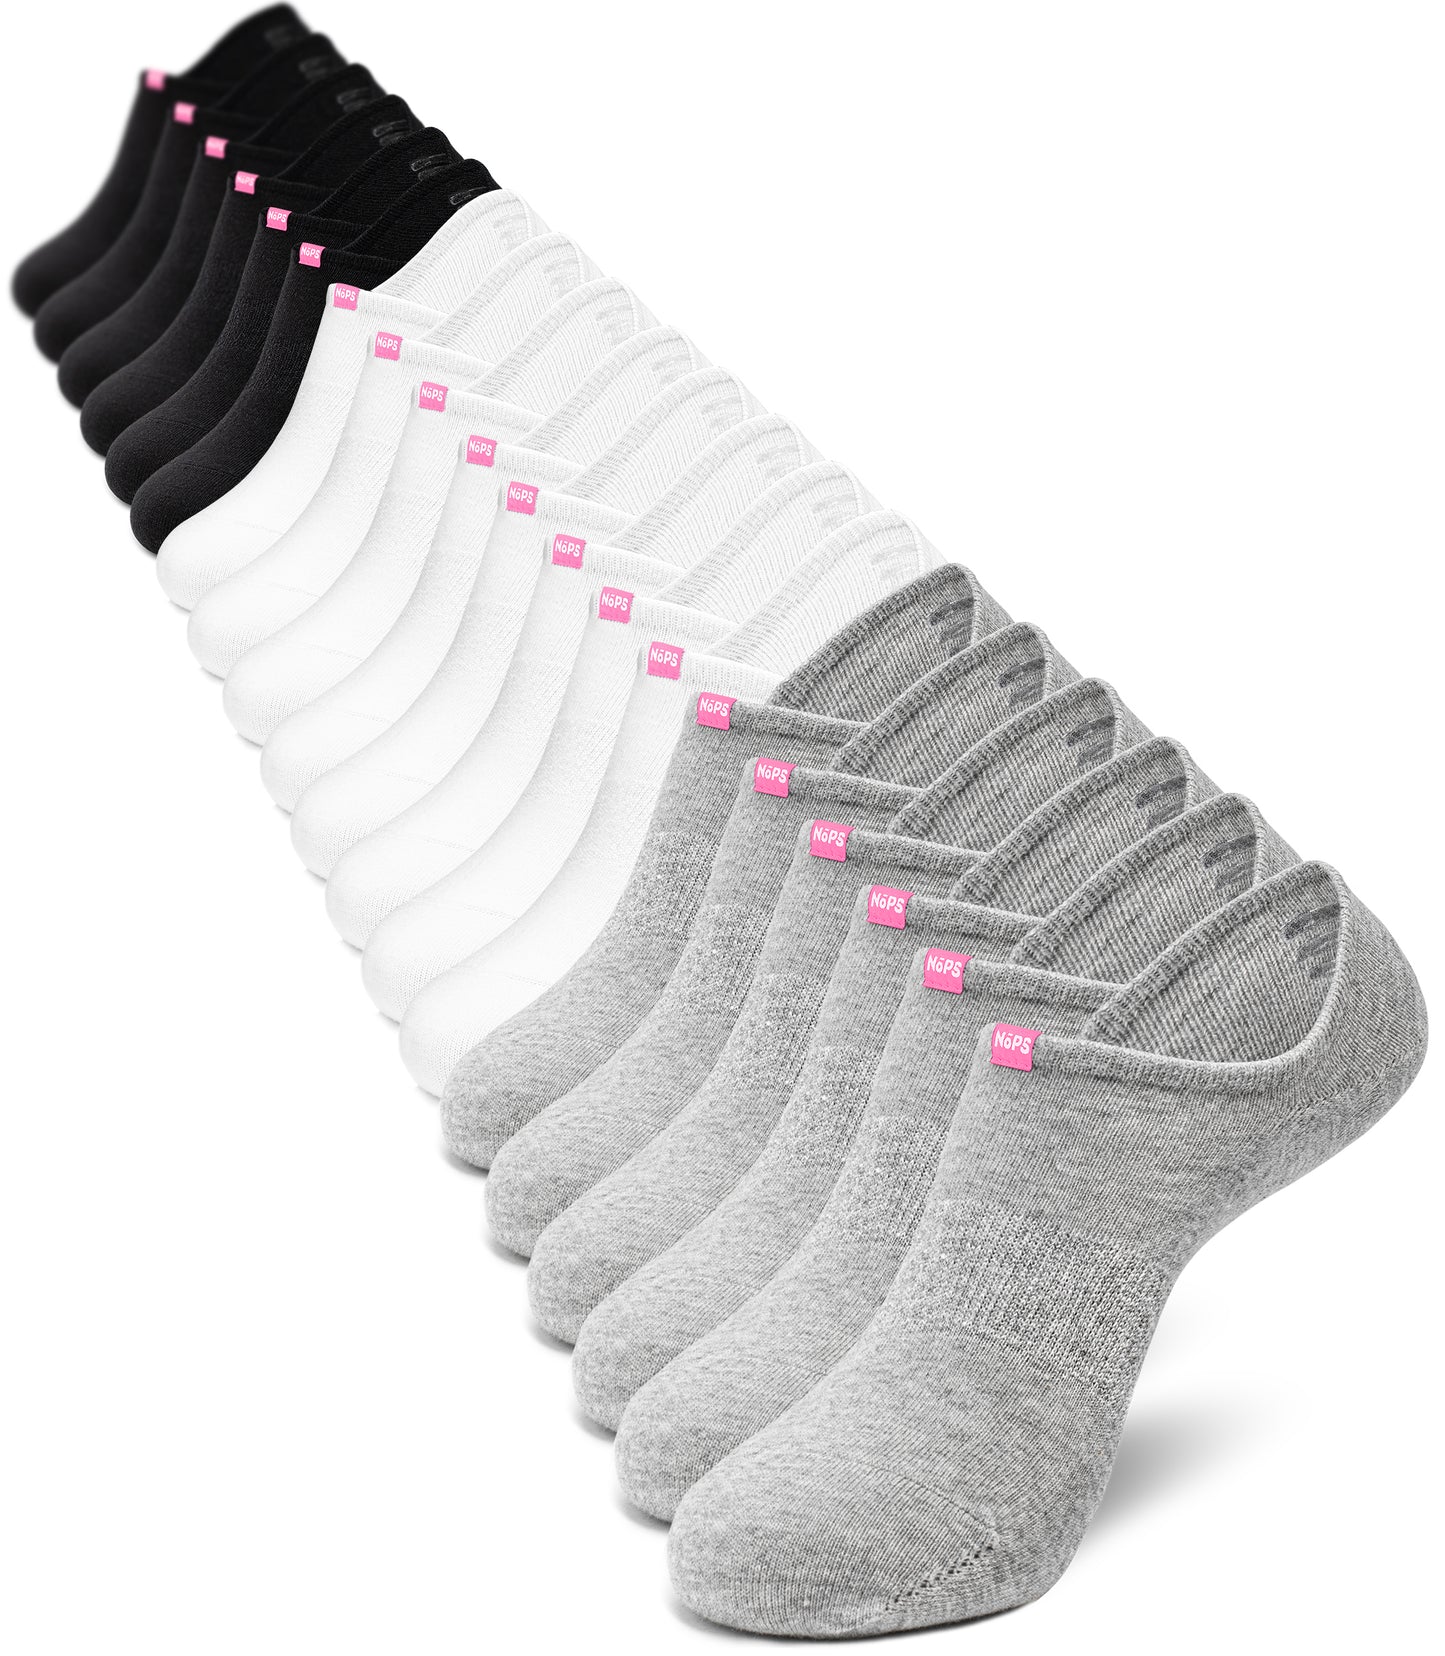 No Show Socks - Multicolor with Pink Tag, 10 pairs